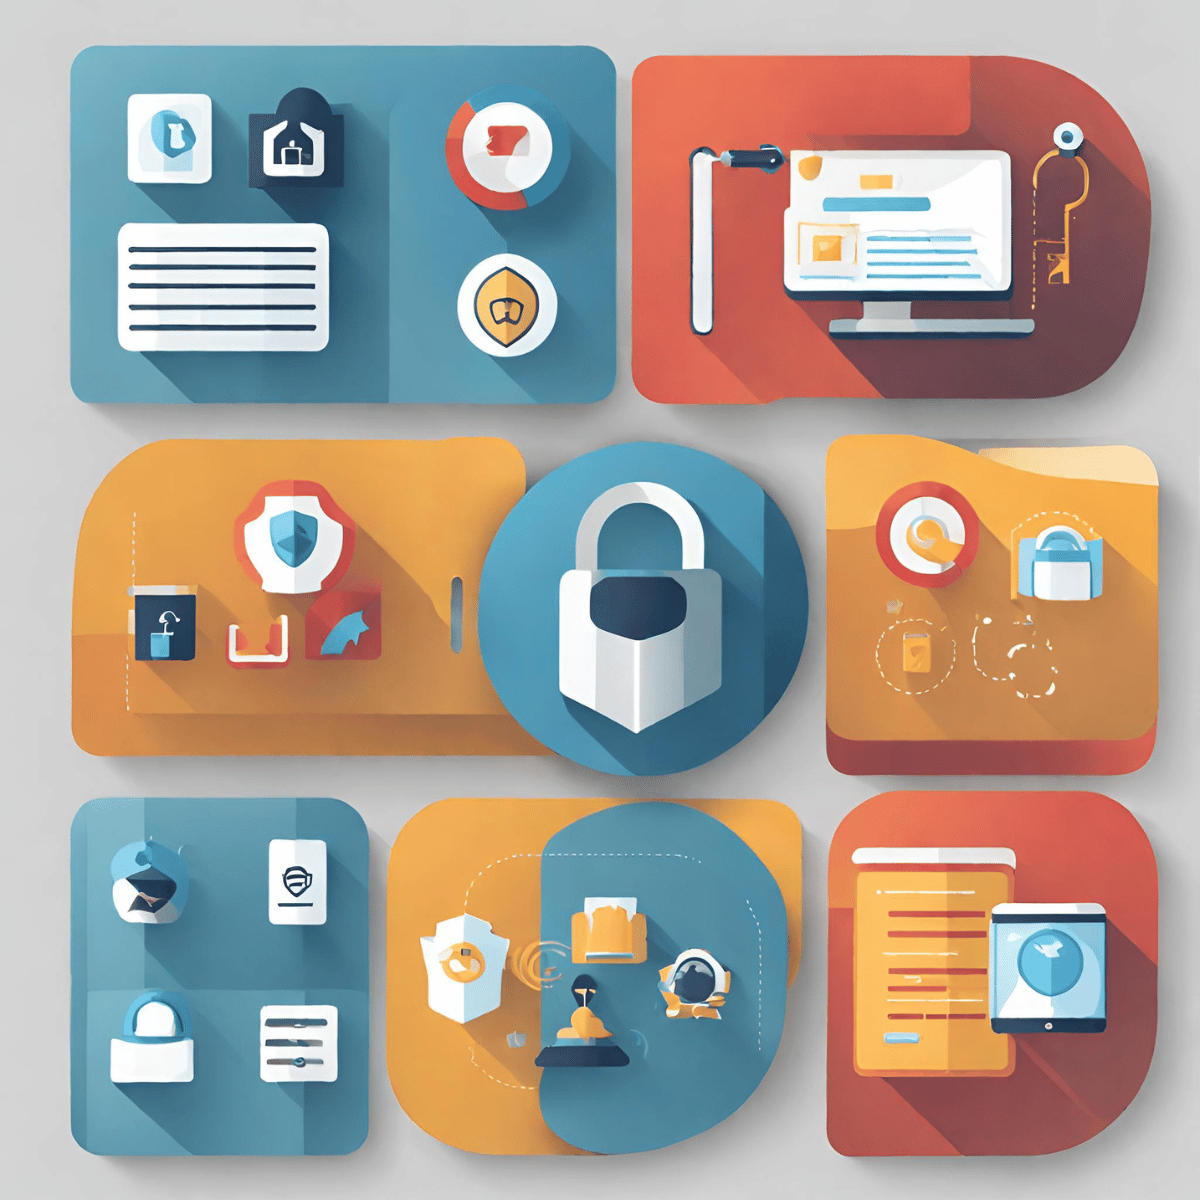 Visual icons representing data protection, privacy, compliance, and security